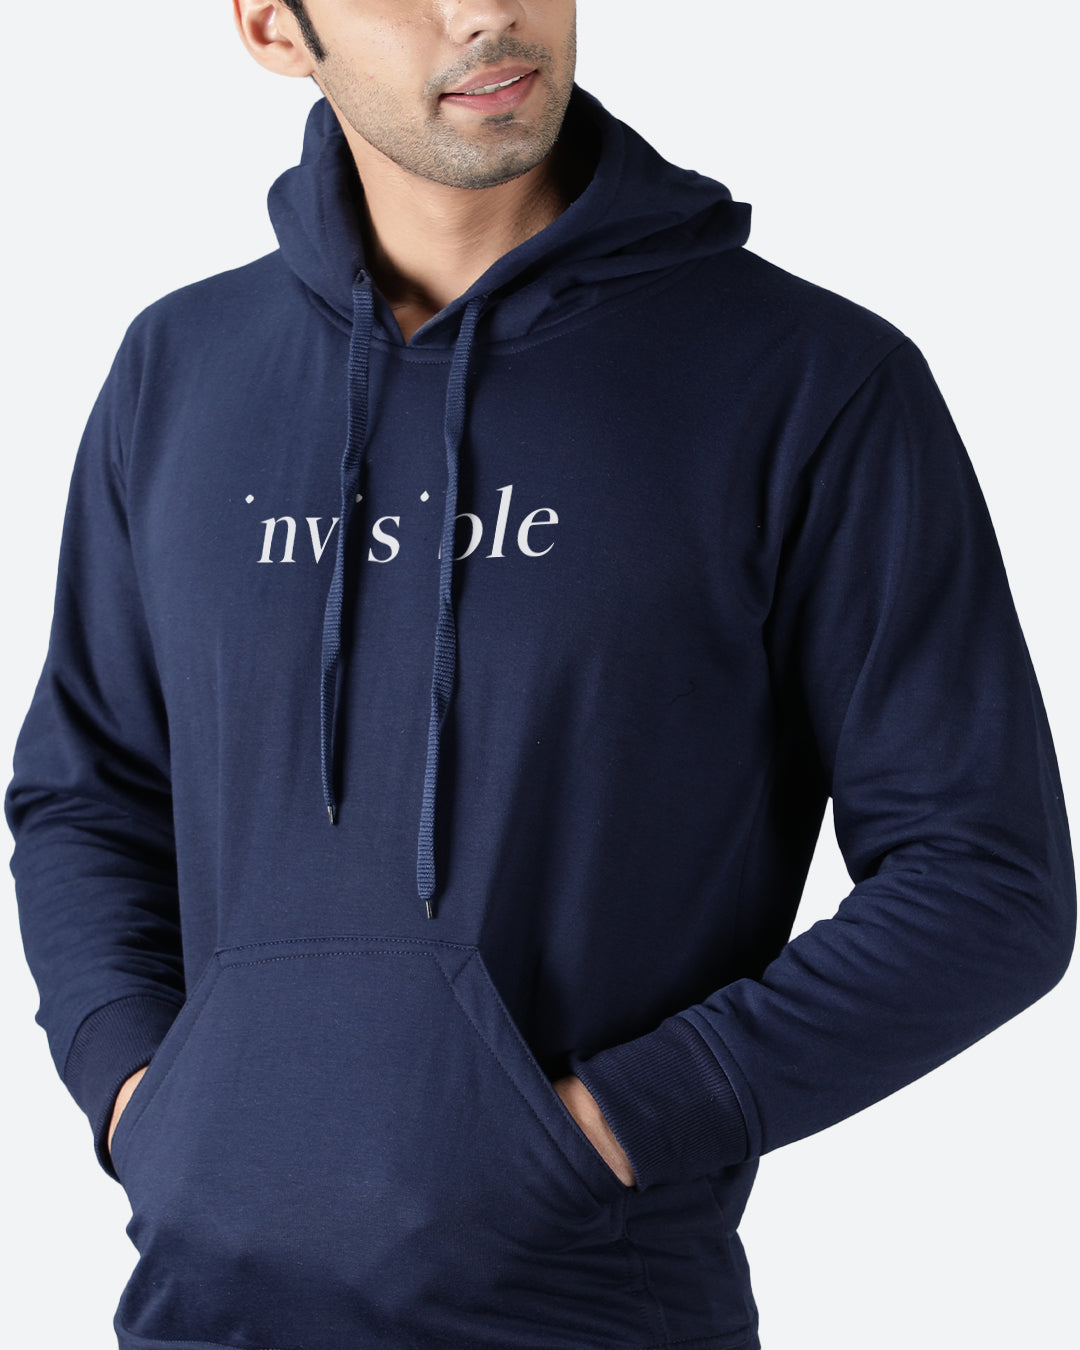 Invisible Men's Hoodie